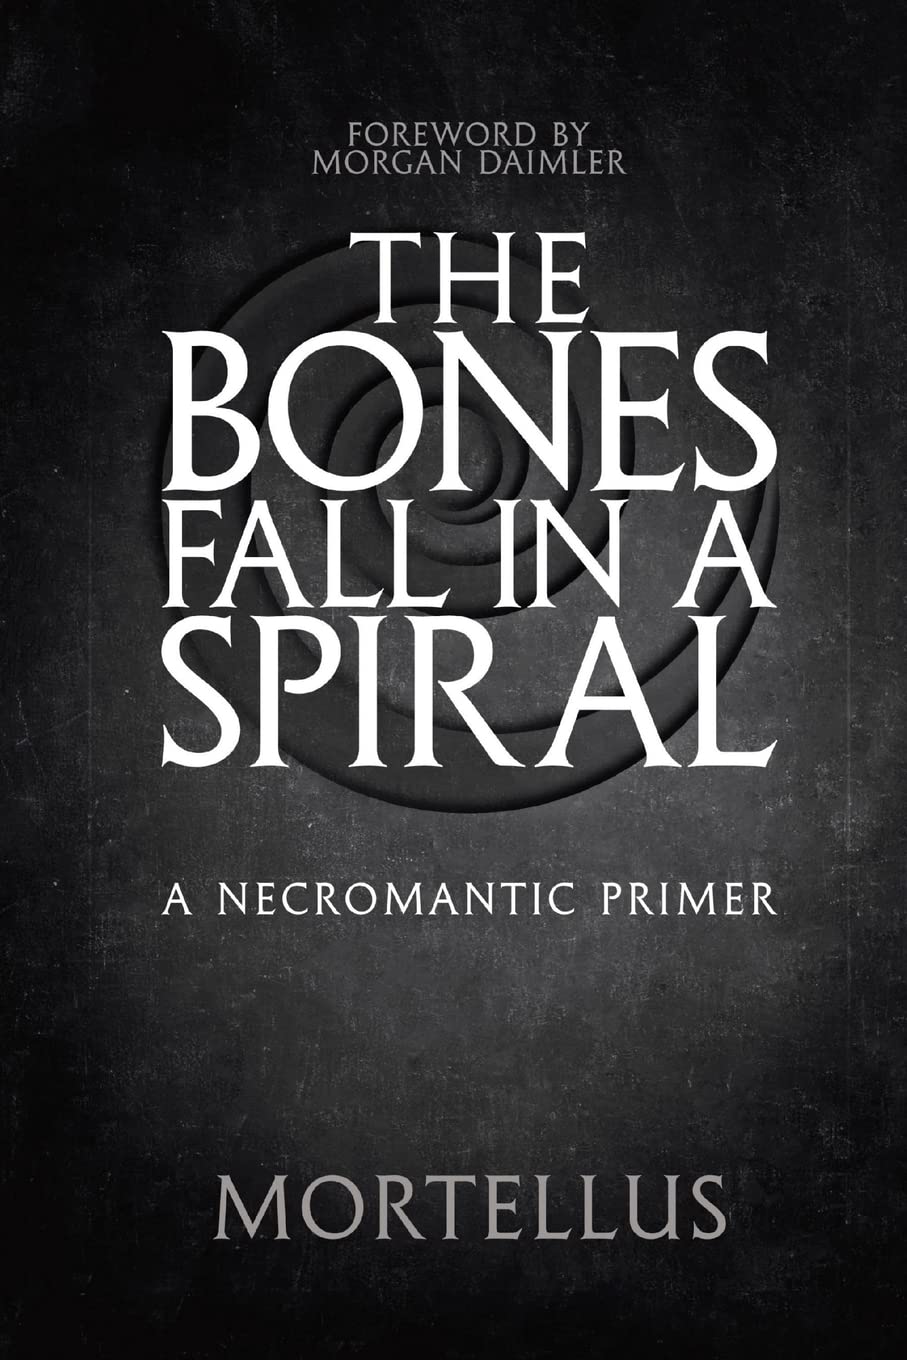 The Bones Fall in a Spiral: A Necromantic Primer by Mortellus